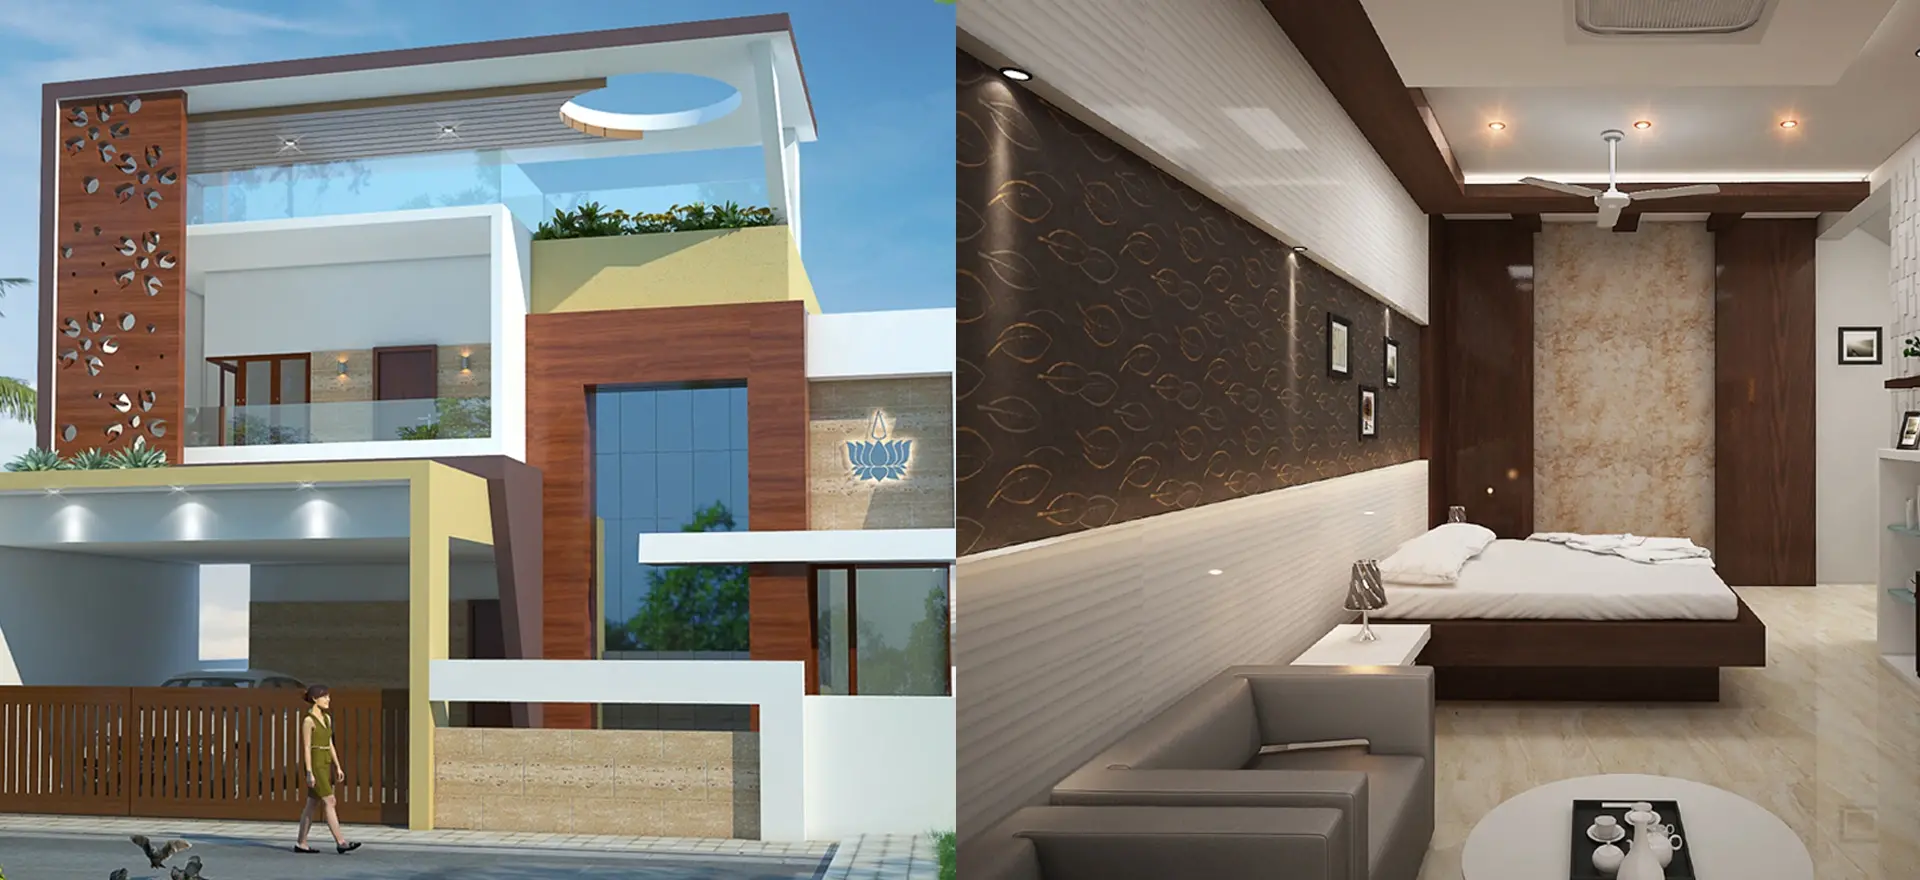 Anss Crafters Architects is a team of architects, based in Tirunelveli, India.